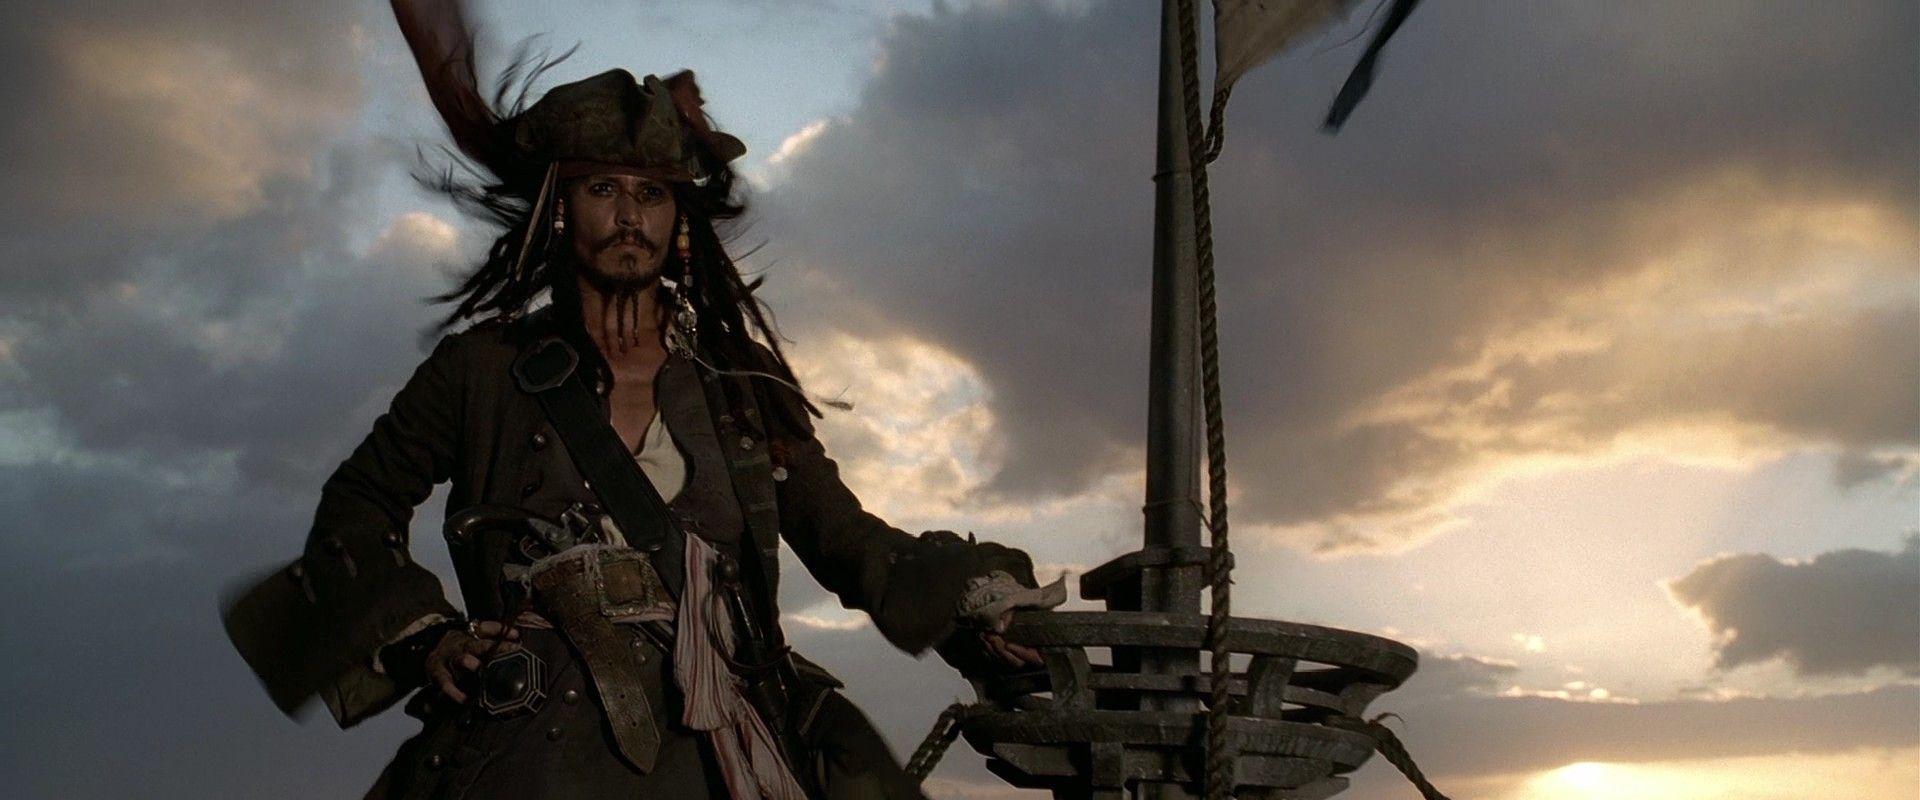 Jack Sparrow of the Caribbean: The Curse of the Black